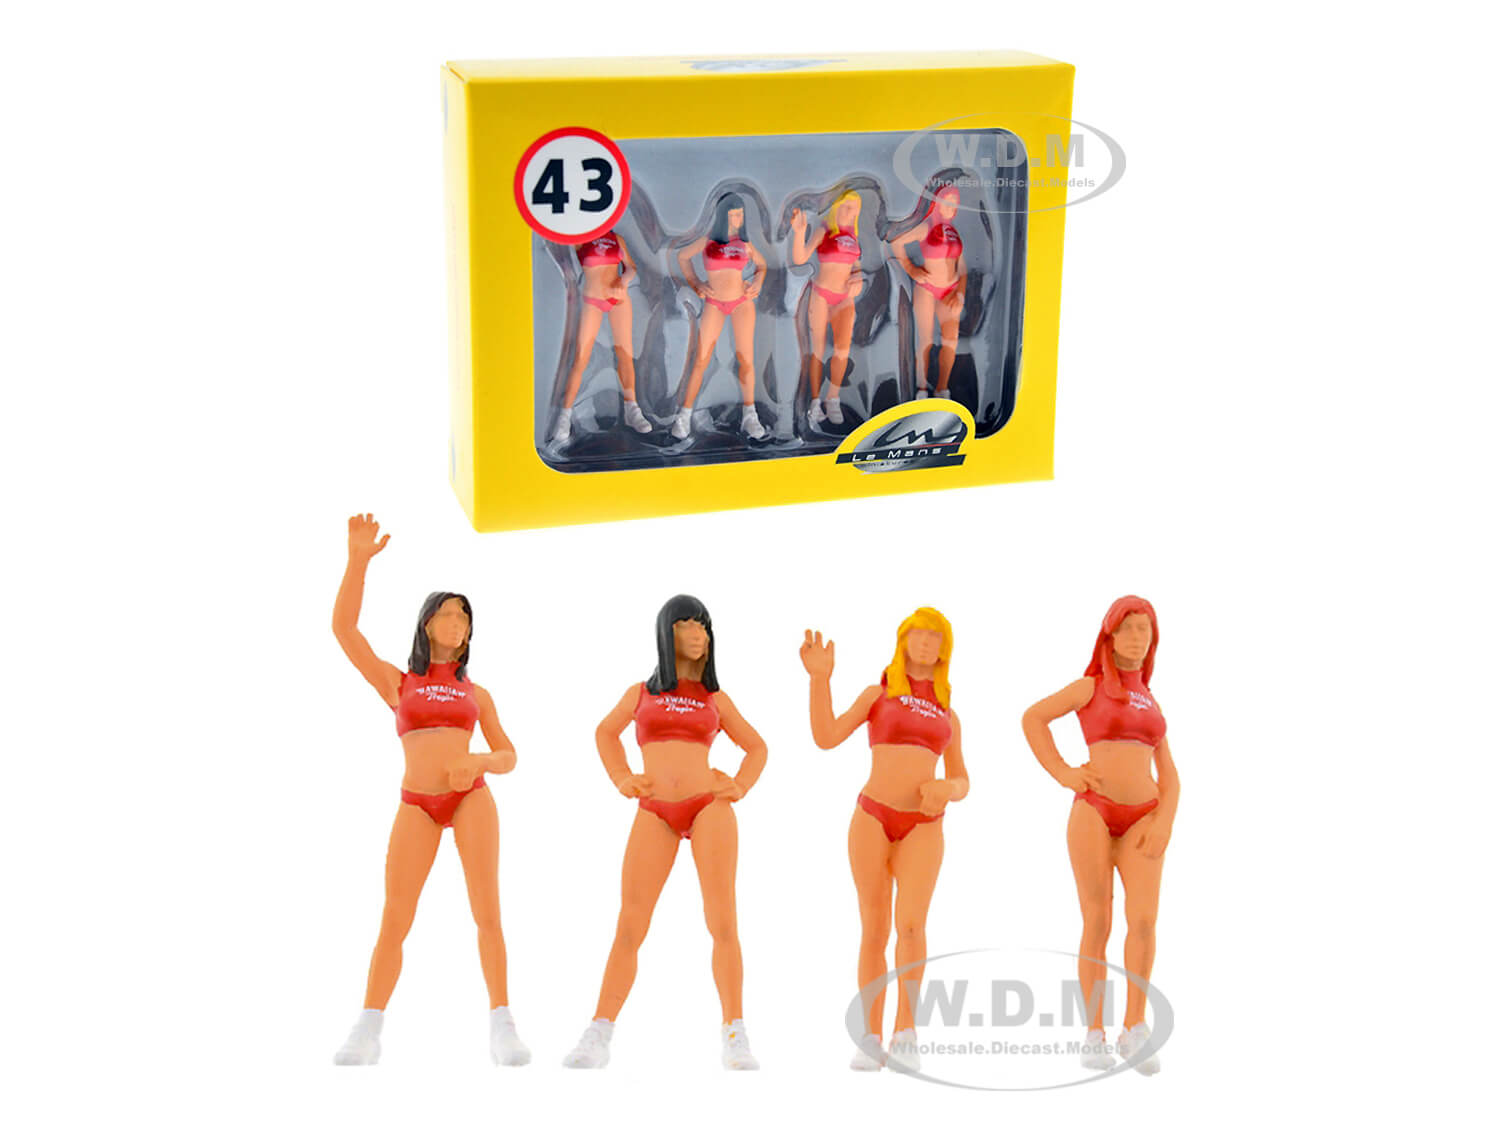 "Hawaiian Tropic Girls" Set of 4 Figurines for 1/43 Scale Model Cars by Le Mans Miniatures